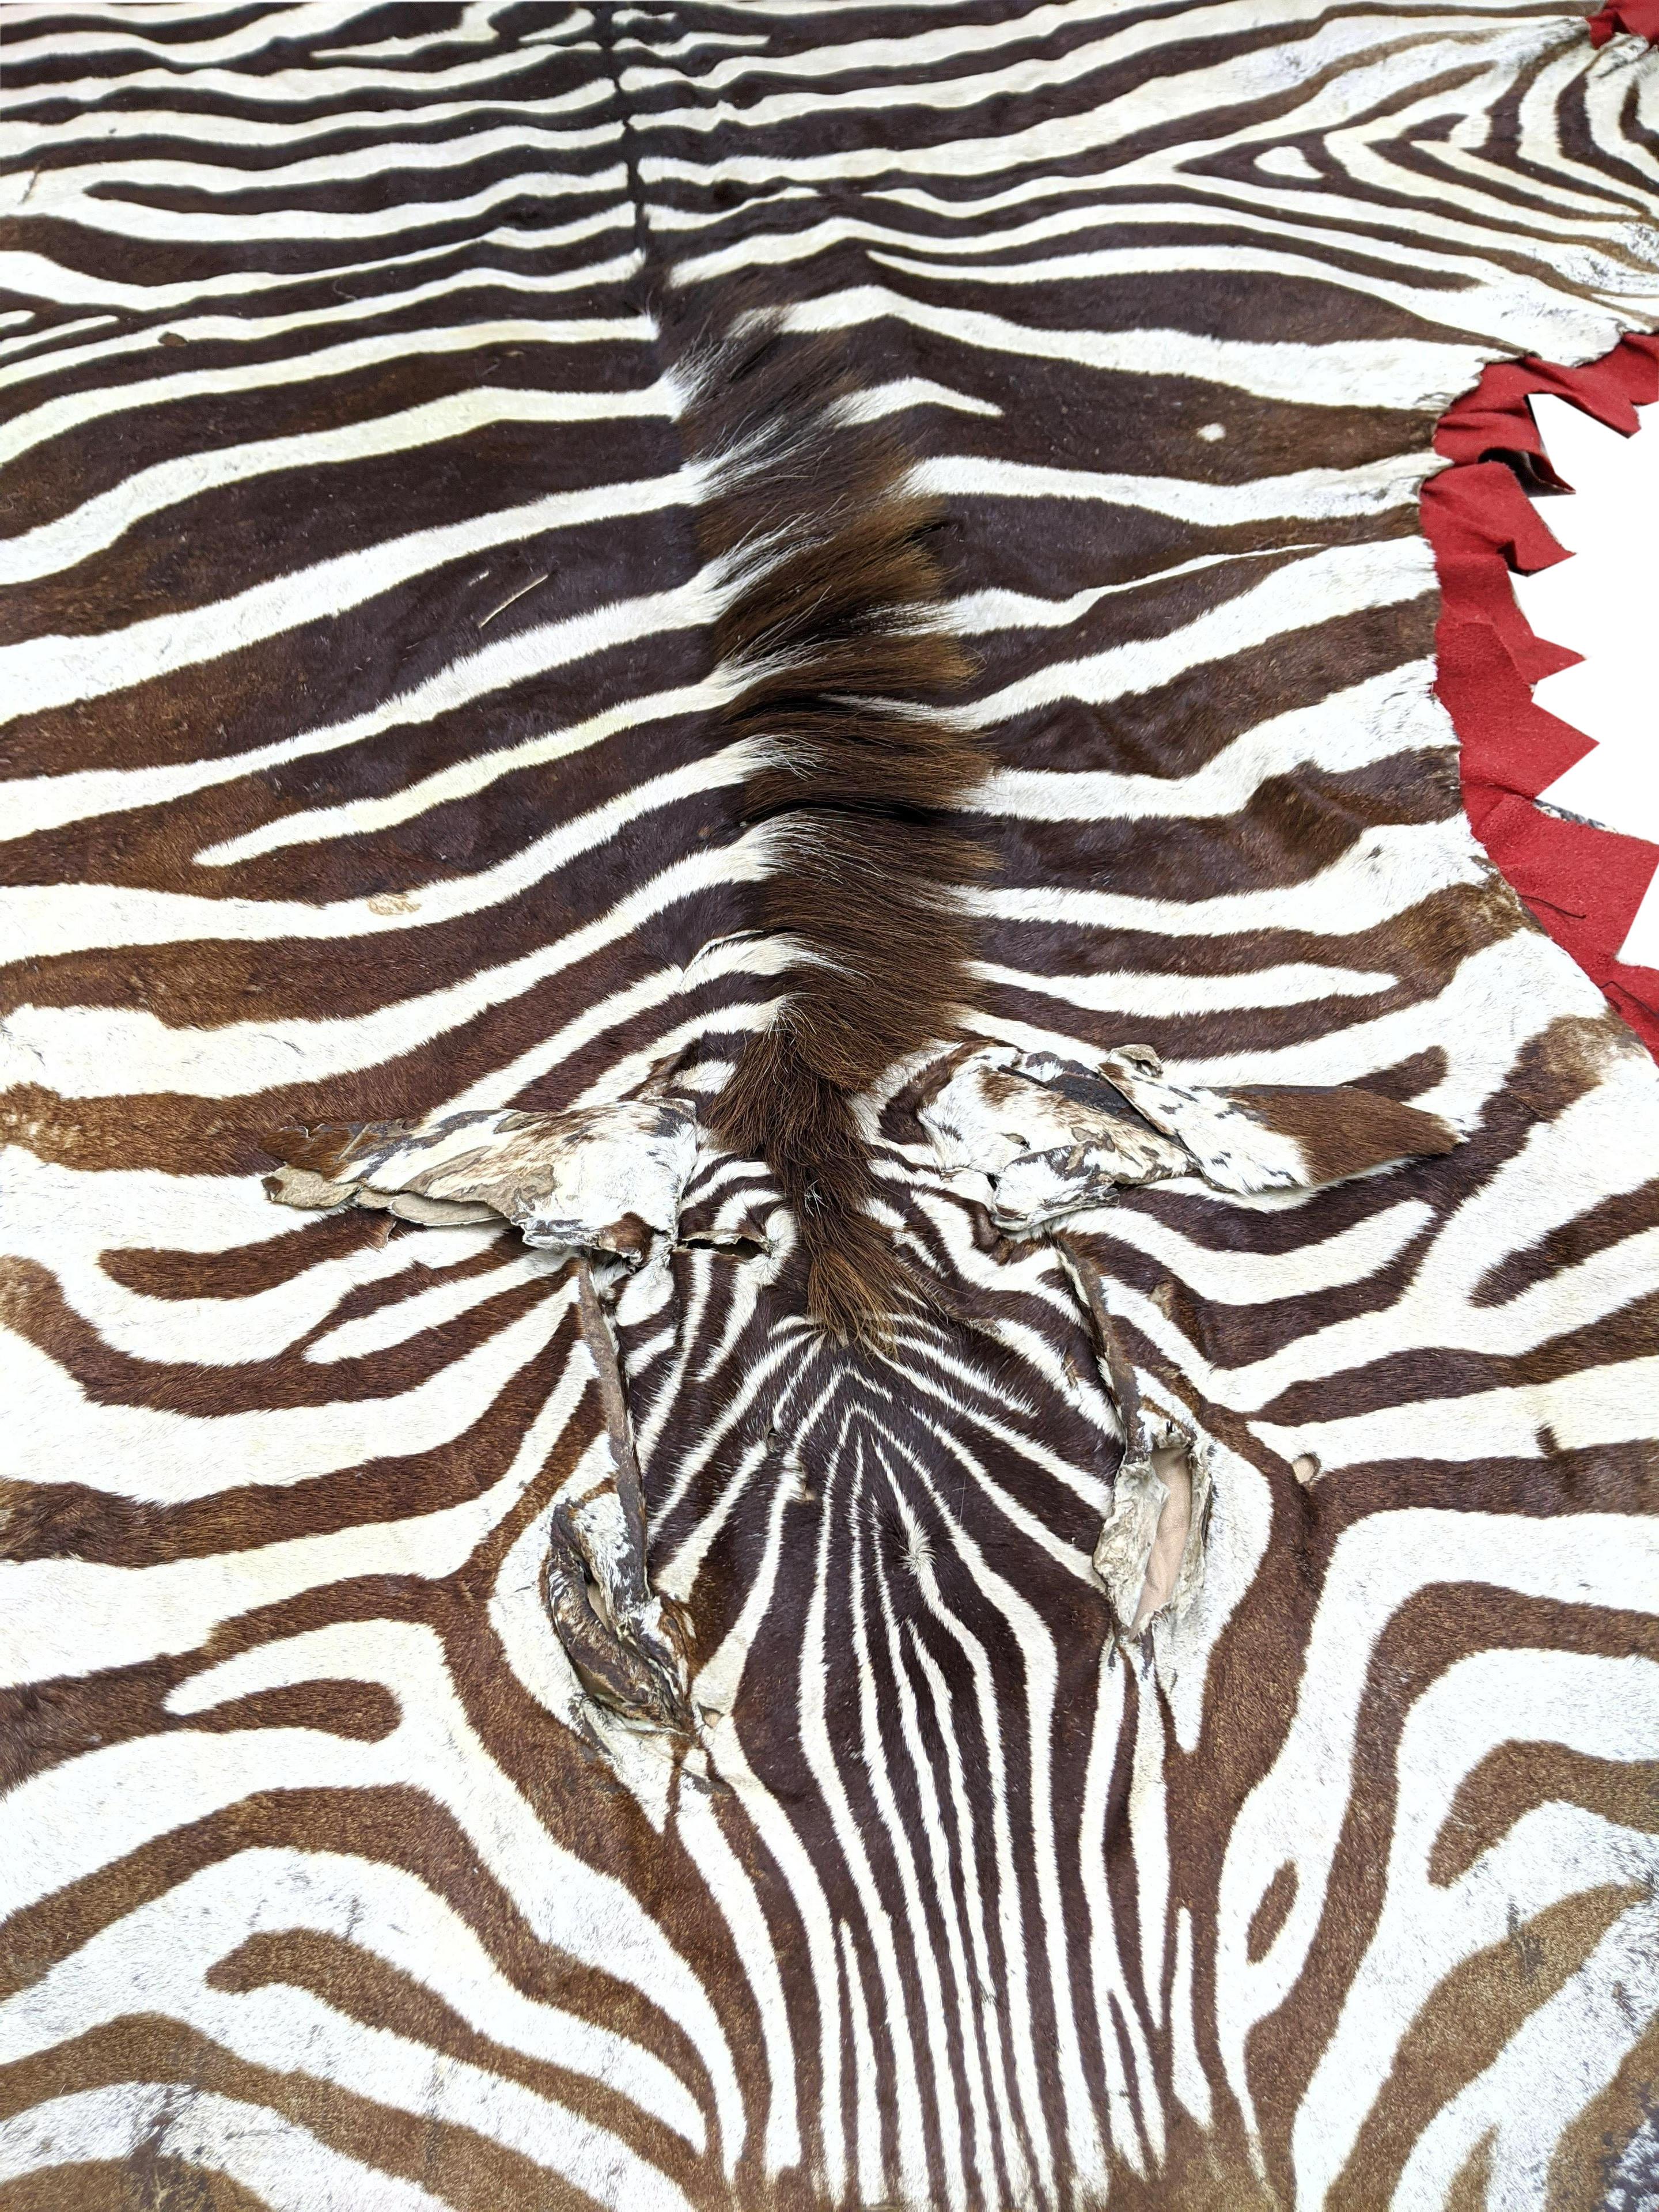 This is a beautiful and large zebra hide with a very rare red border. This piece is unique in its look and is a wonderful specimen.